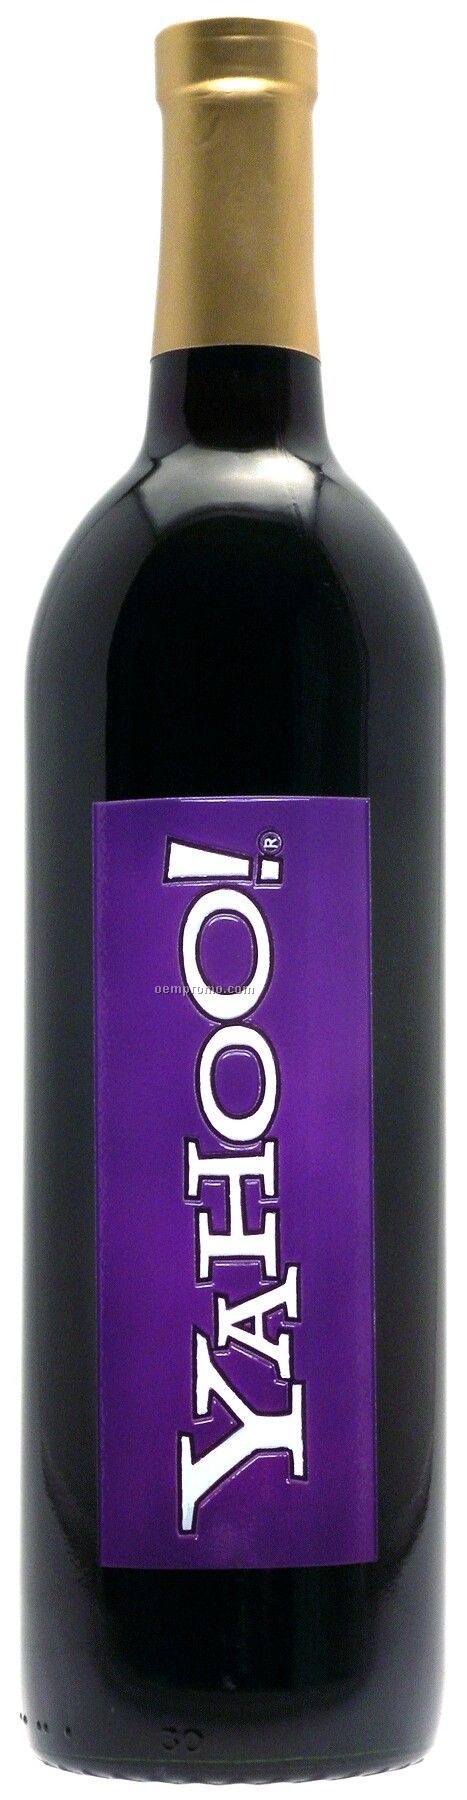 750ml Standard Merlot Wine Etched With 2 Color Fill